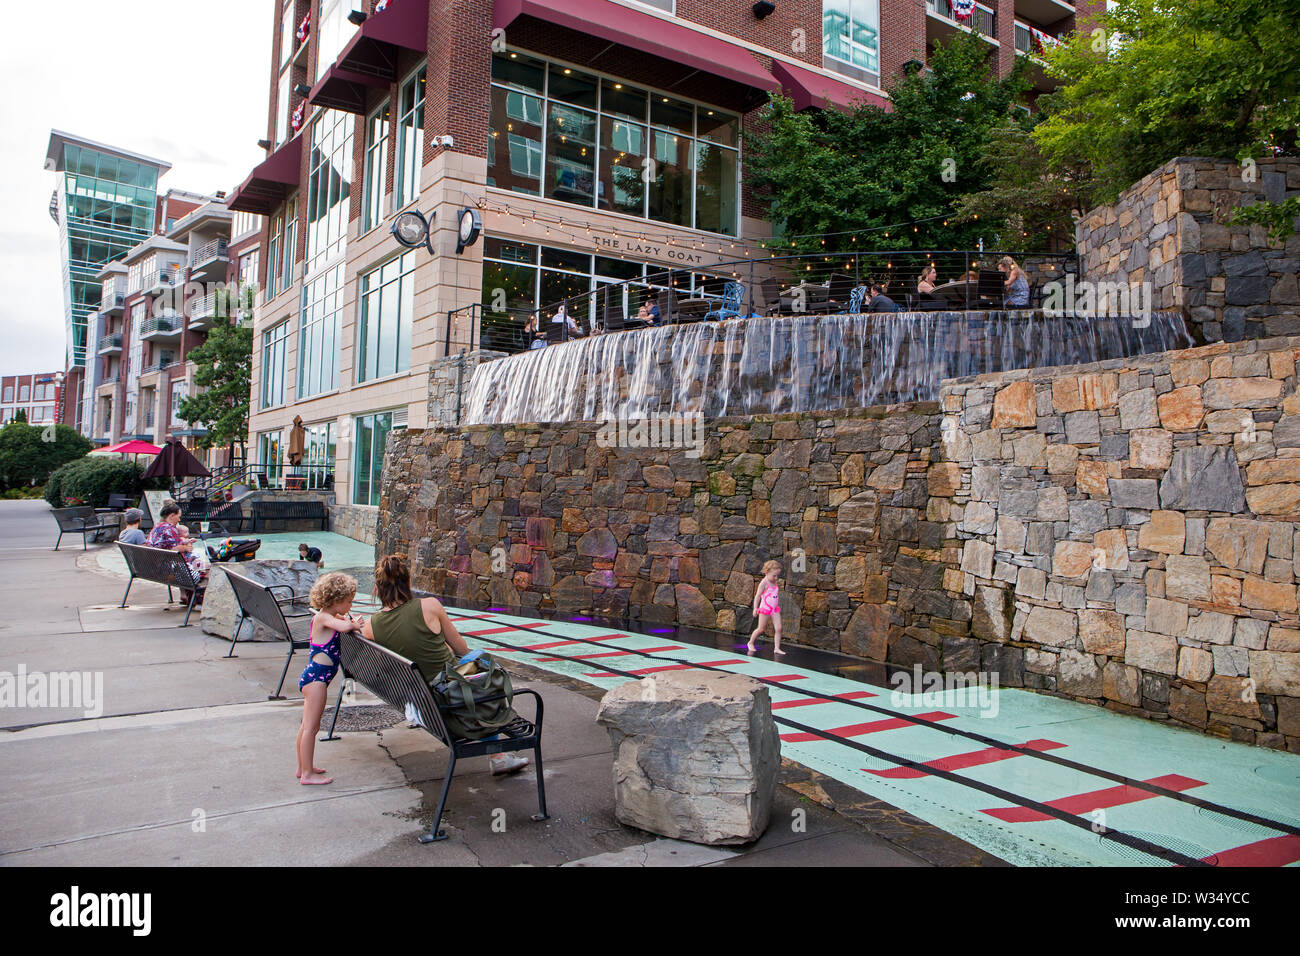 GREENVILLE, SC (USA) - July 5, 2019: A view of the downtown River Walk with the River Place development of hotels, restaurants and shops. Stock Photo